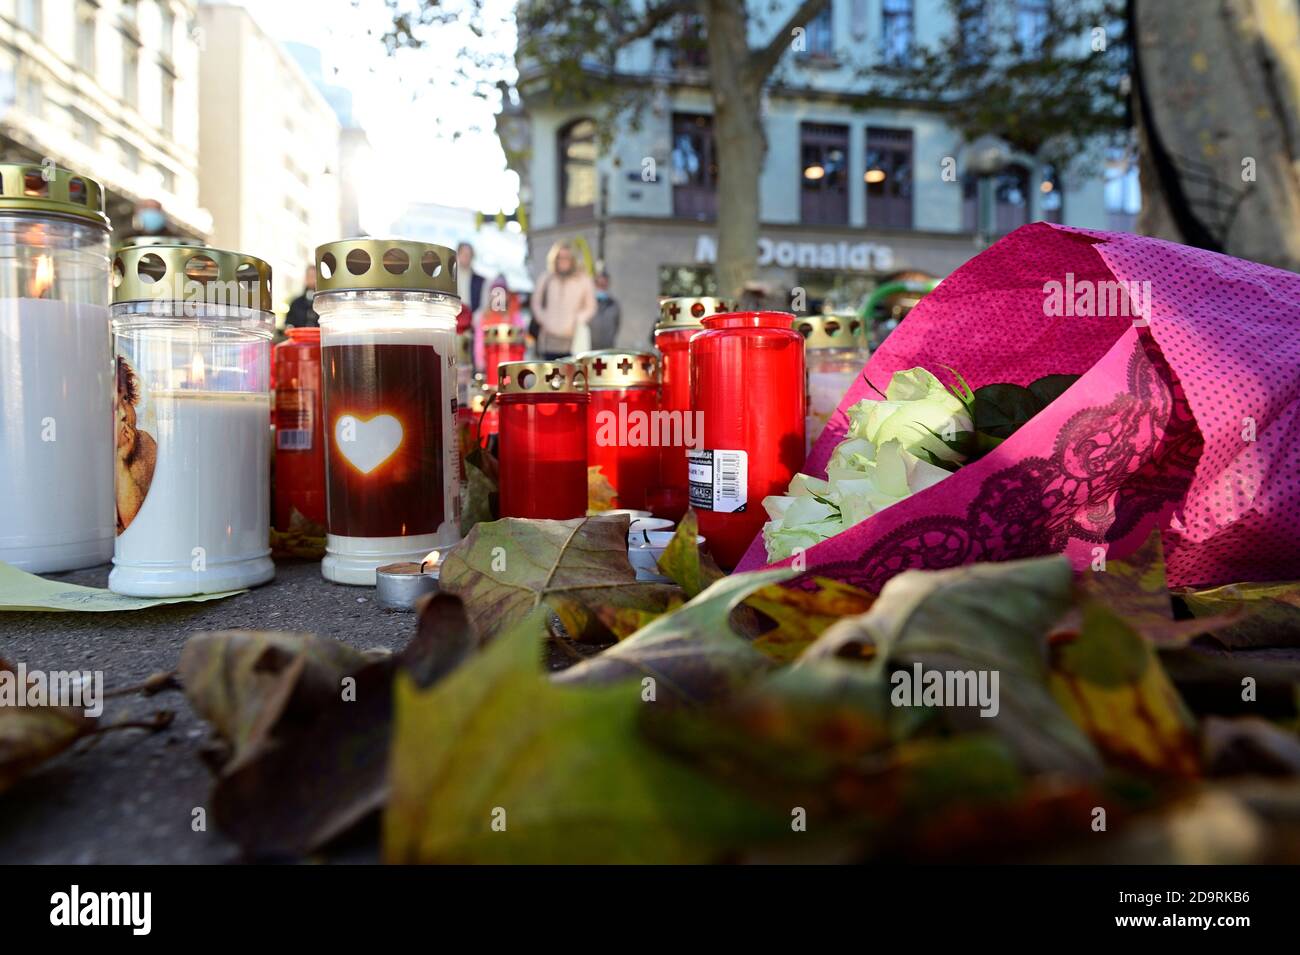 Vienna, Austria. 7th Nov, 2020. People mourn the victims of the terrorist attack on November 02, 2020. Picture shows flowers and candles at the crime scene. Stock Photo